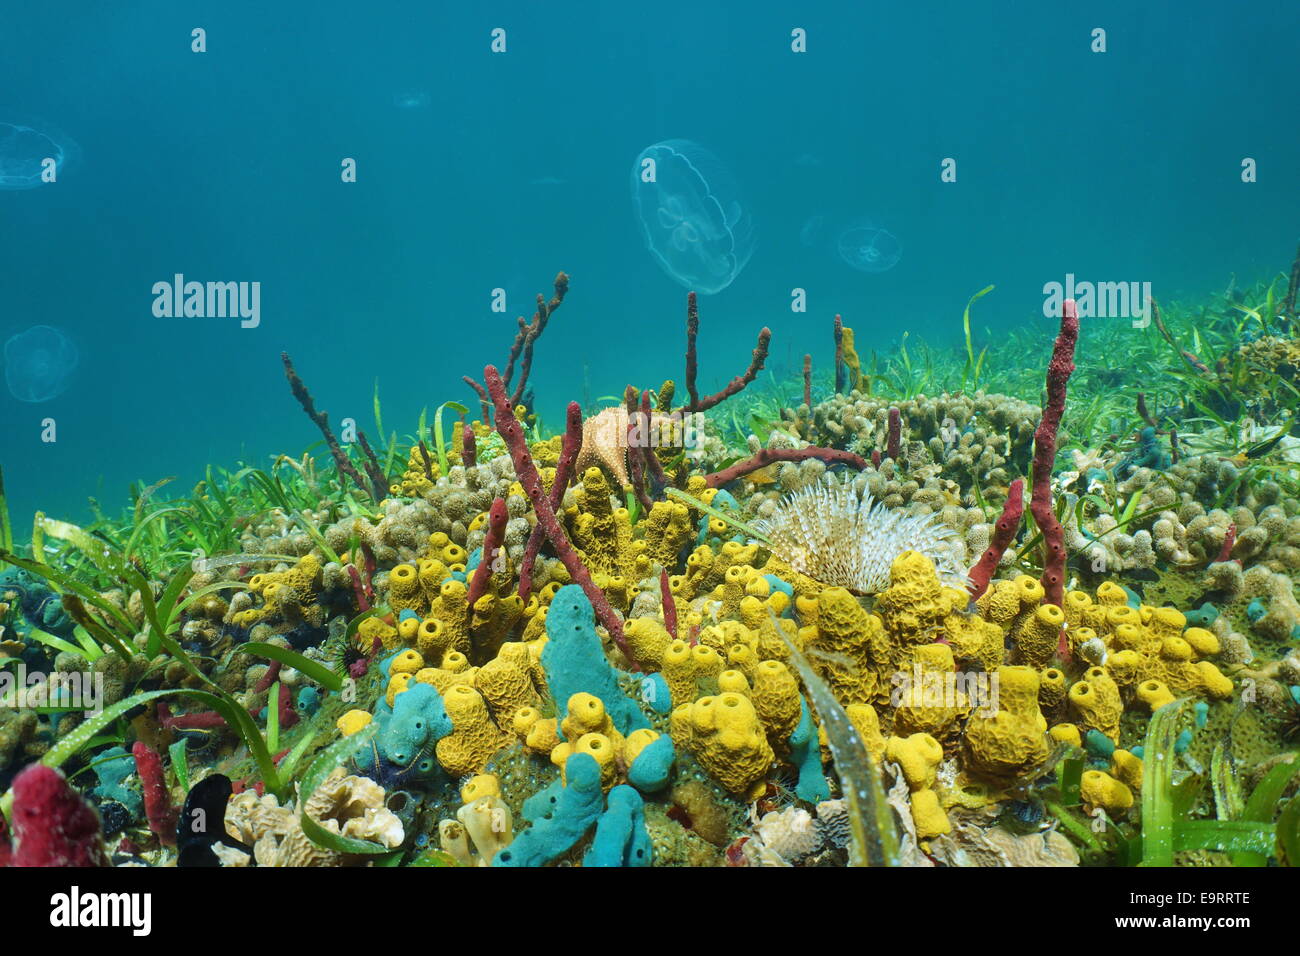 Seabed with colorful sea creatures and jellyfish in background, Caribbean sea Stock Photo